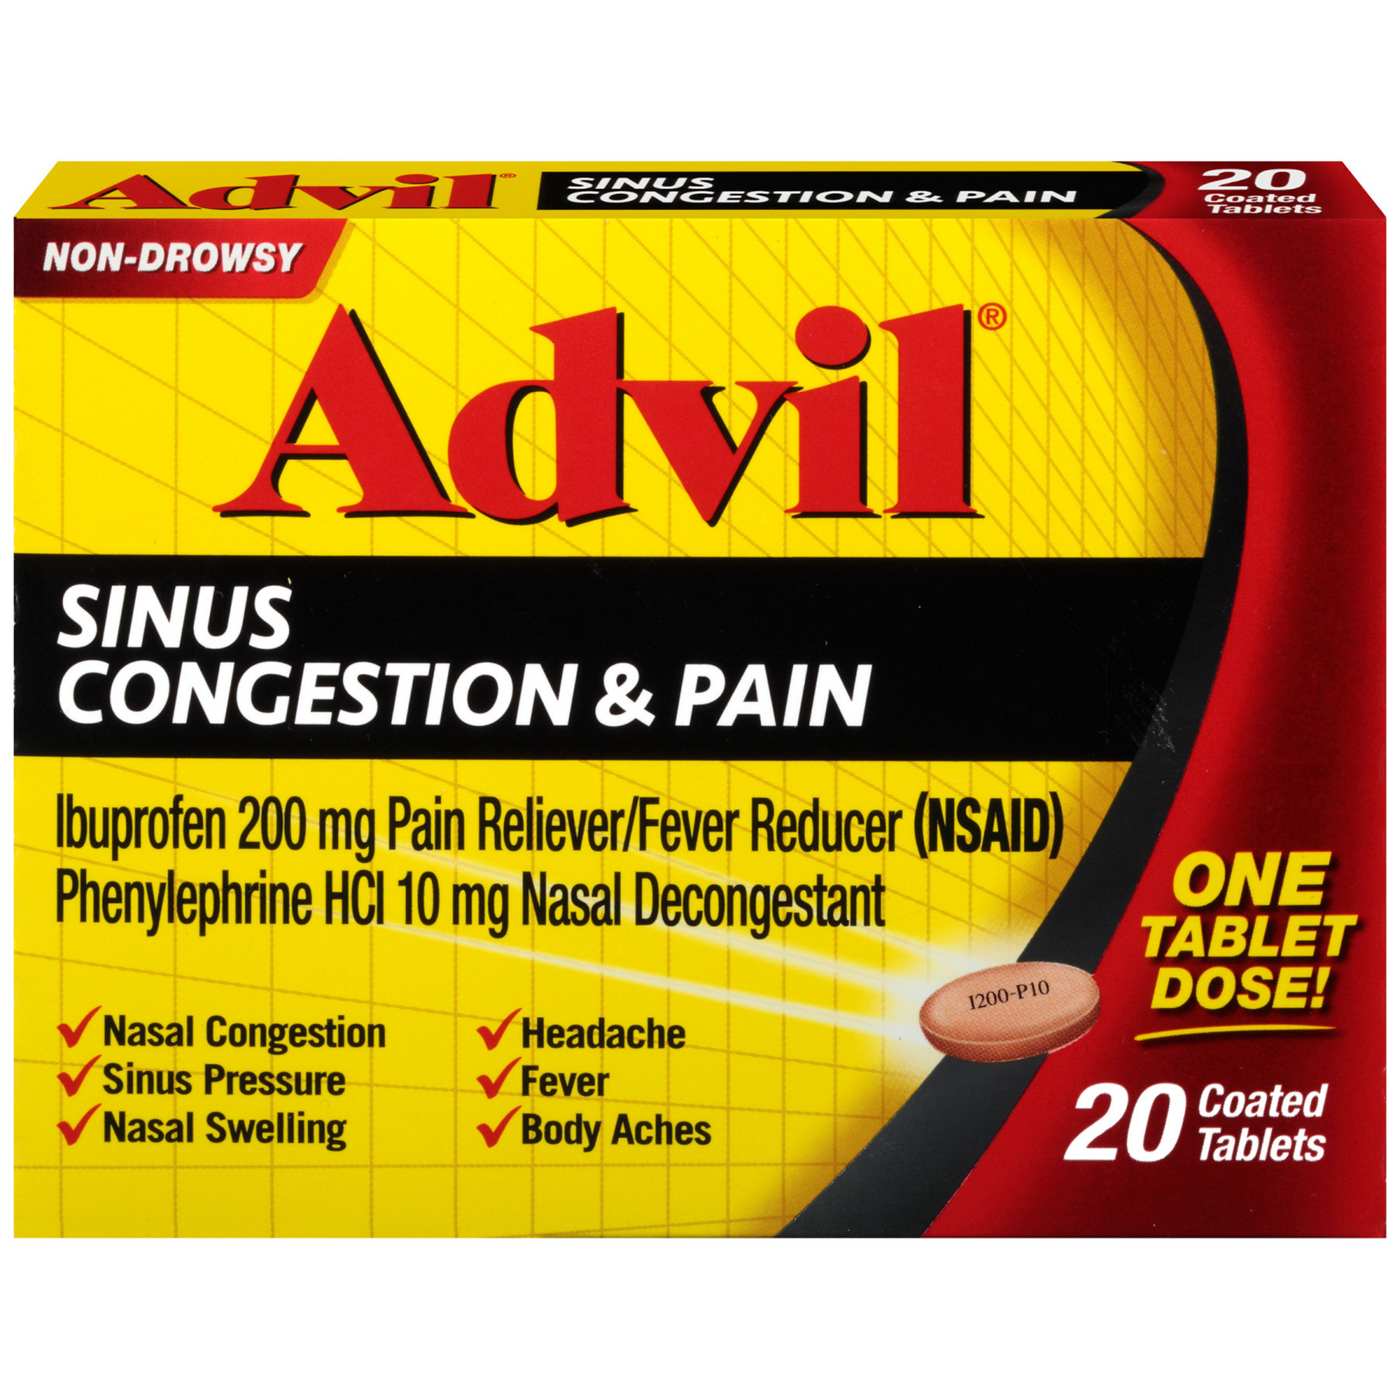 Advil Sinus Congestion and Pain Relief; image 7 of 8